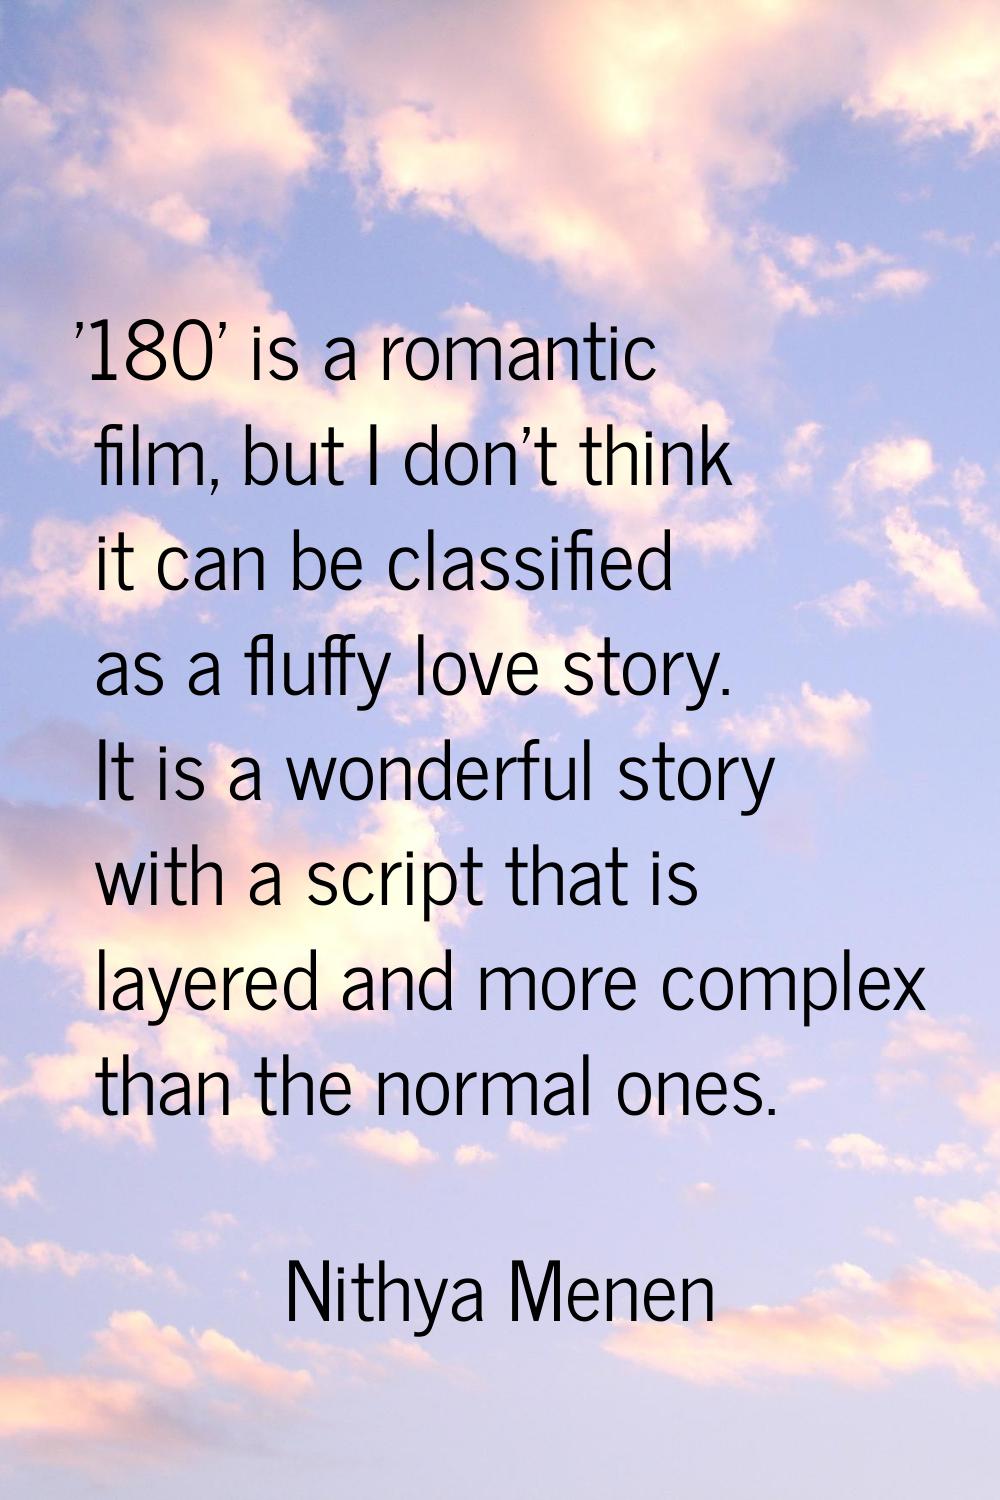 '180' is a romantic film, but I don't think it can be classified as a fluffy love story. It is a wo